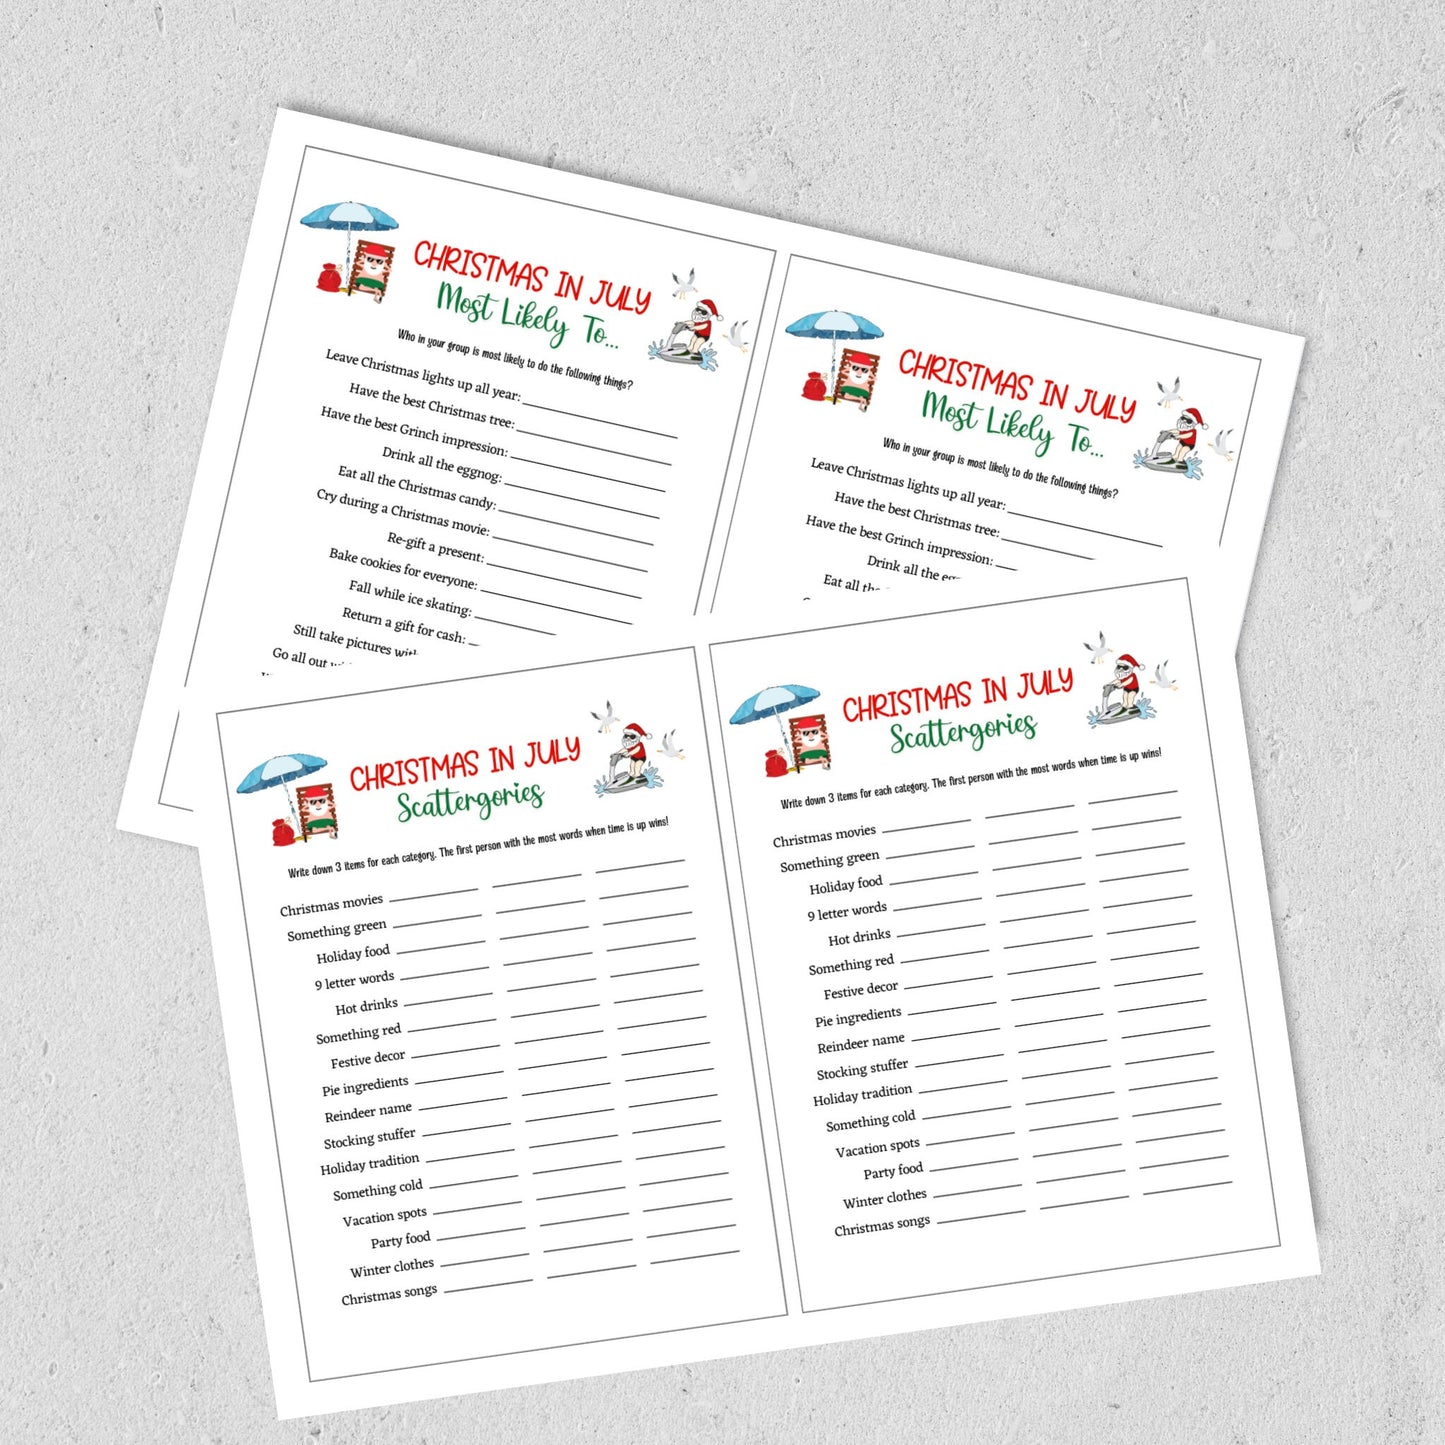 Christmas in July Games Bundle Printable, Family Activity, Office Party Xmas Games, Fun Holiday Games, Xmas Party Games For Kids & Adults